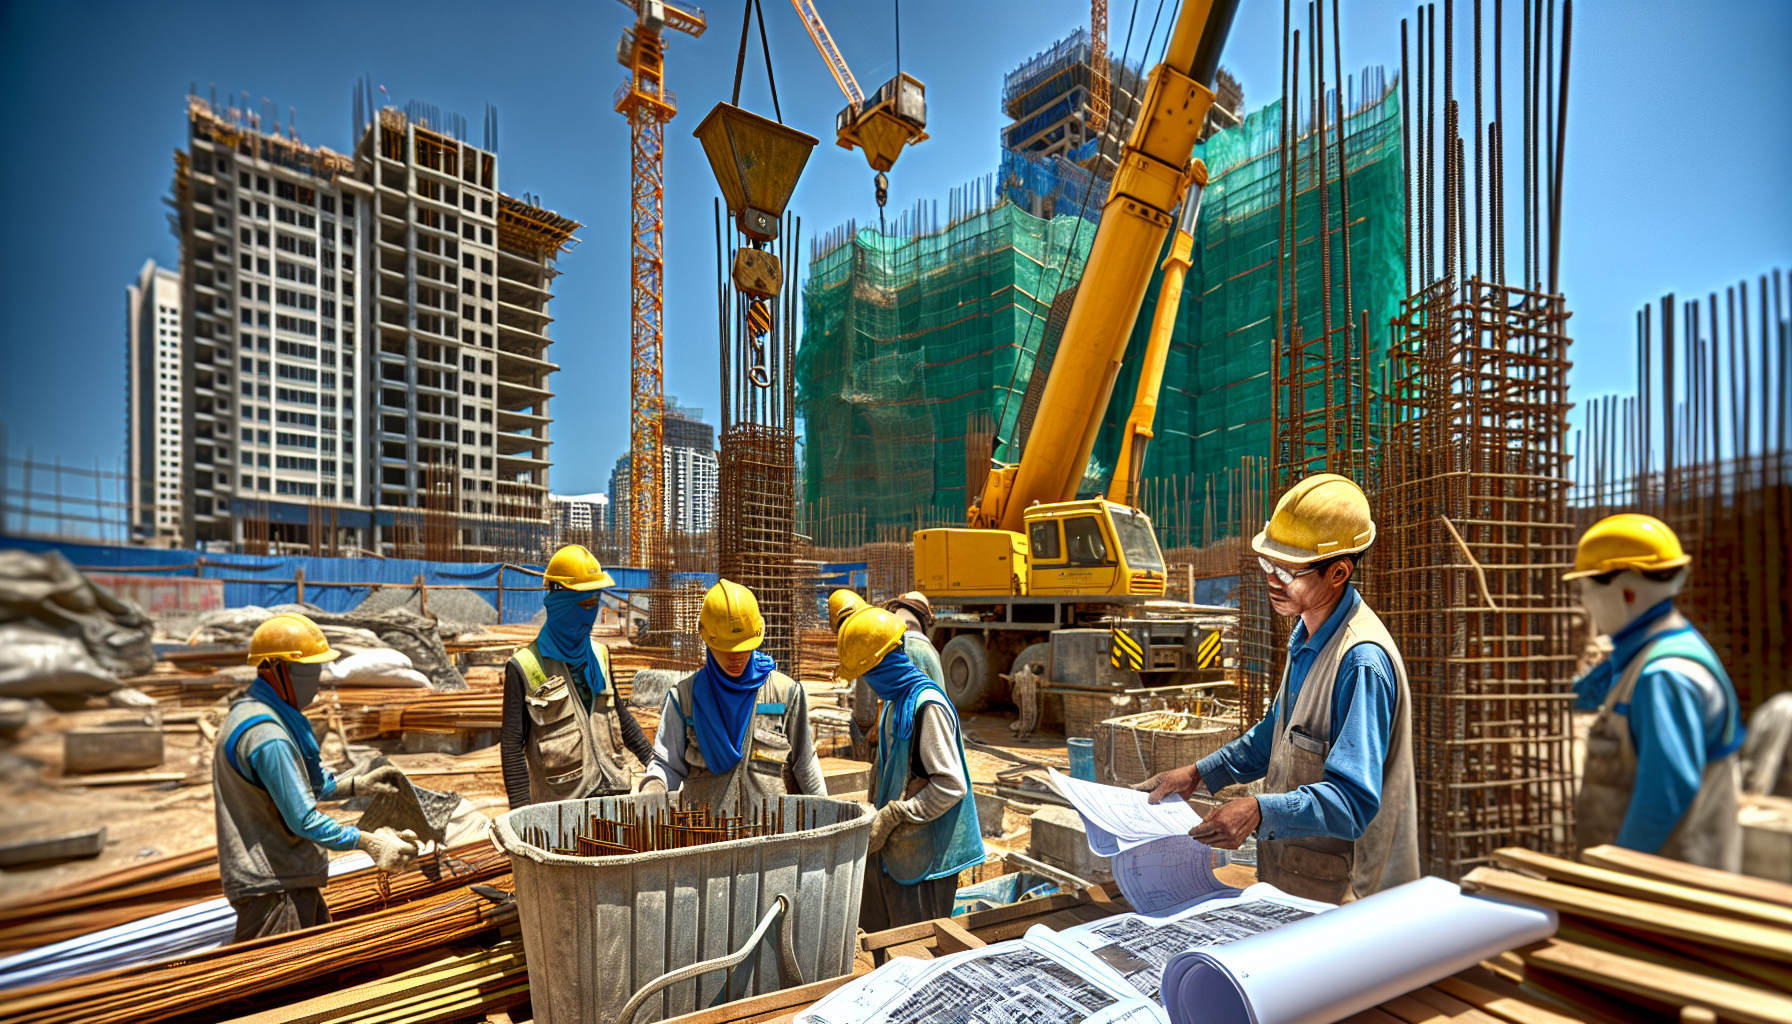 Construction site with workers and equipment